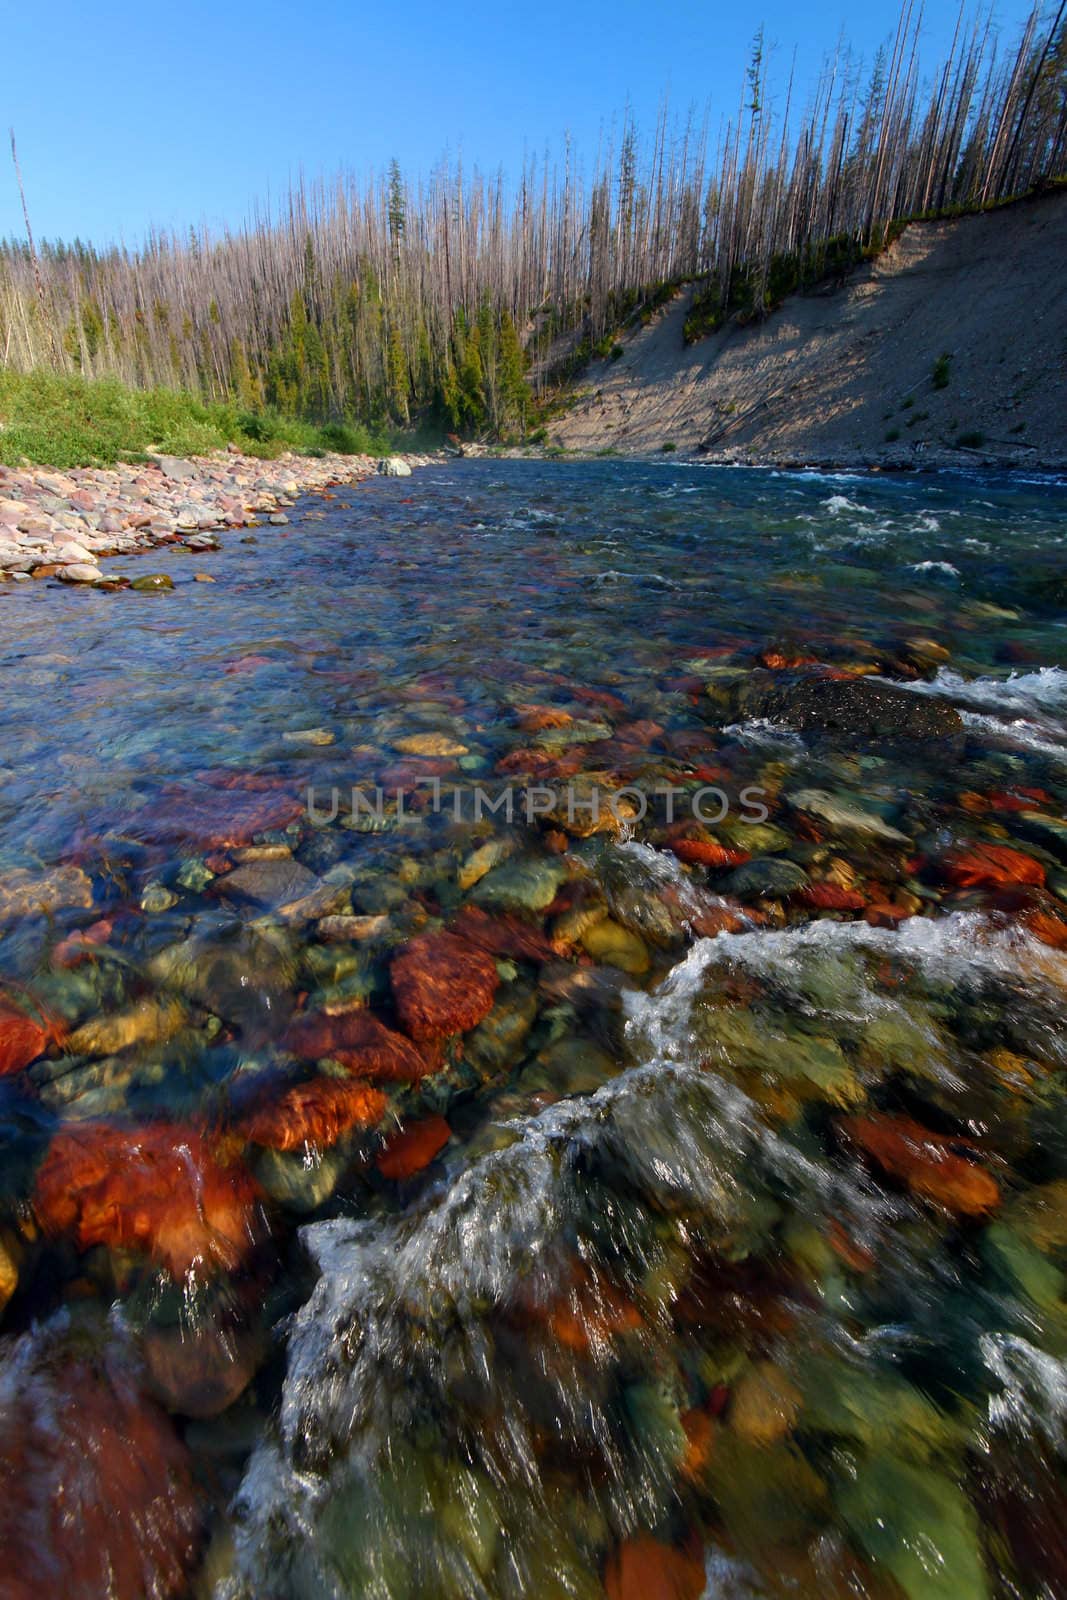 Rapids of the North Fork Flathead River on the border of Glacier National Park.